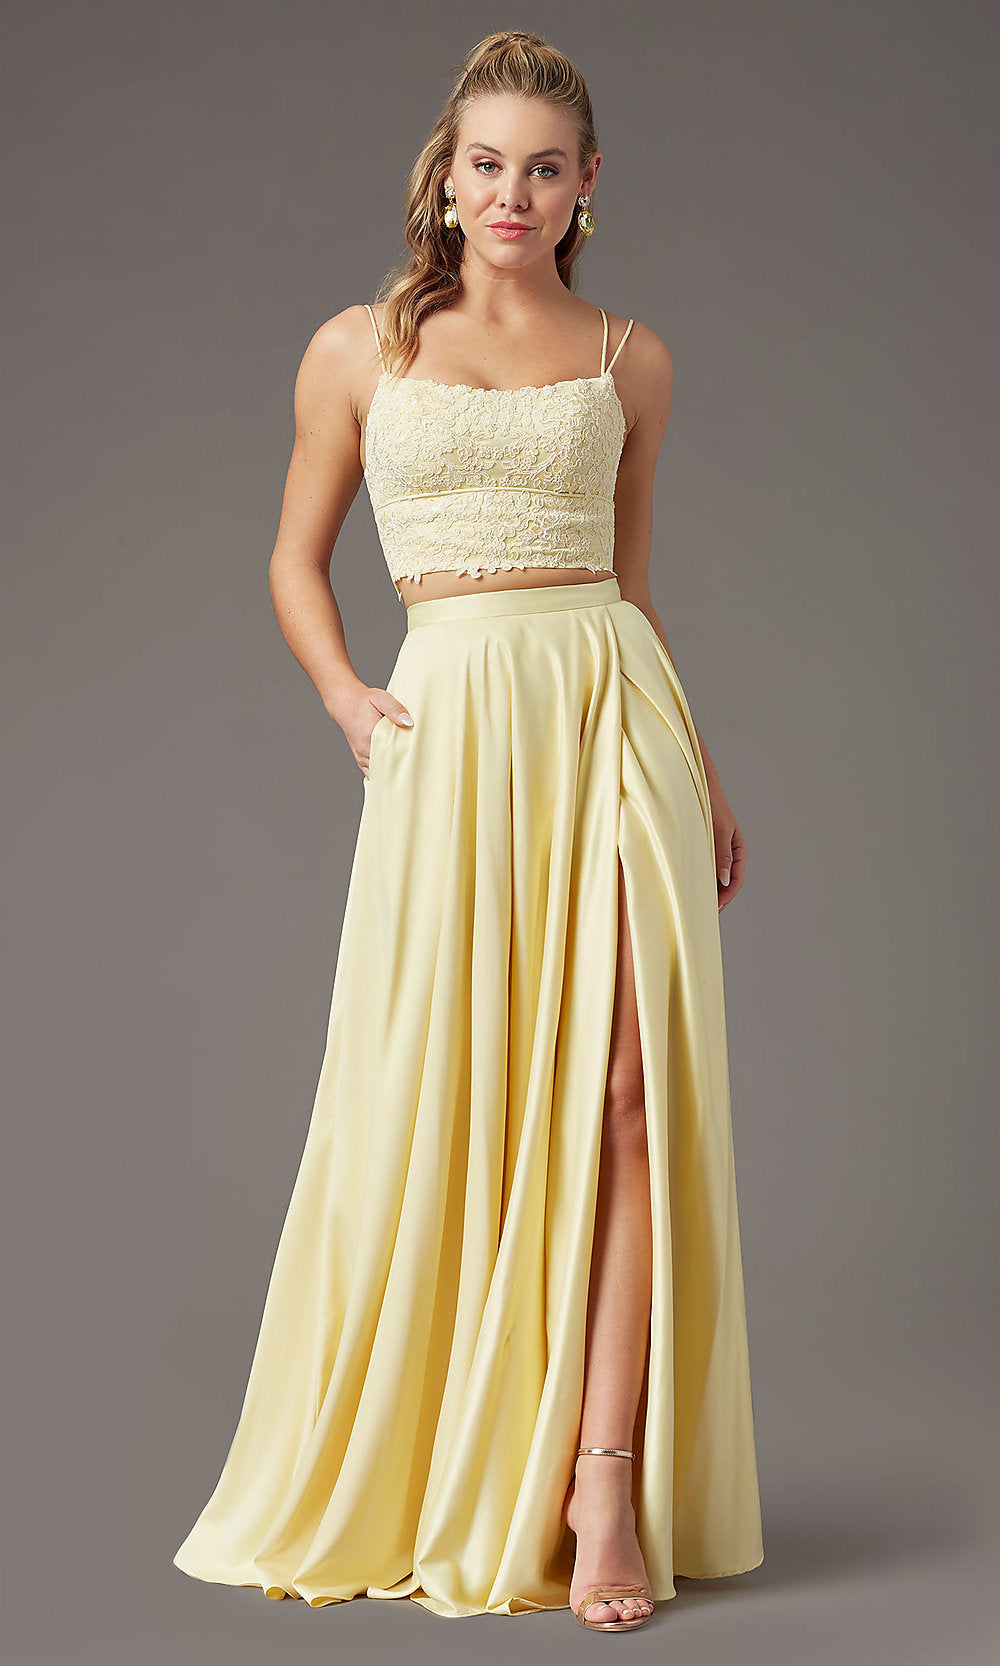 Sunshine Satin Long Two-Piece Formal Prom Dress by PromGirl